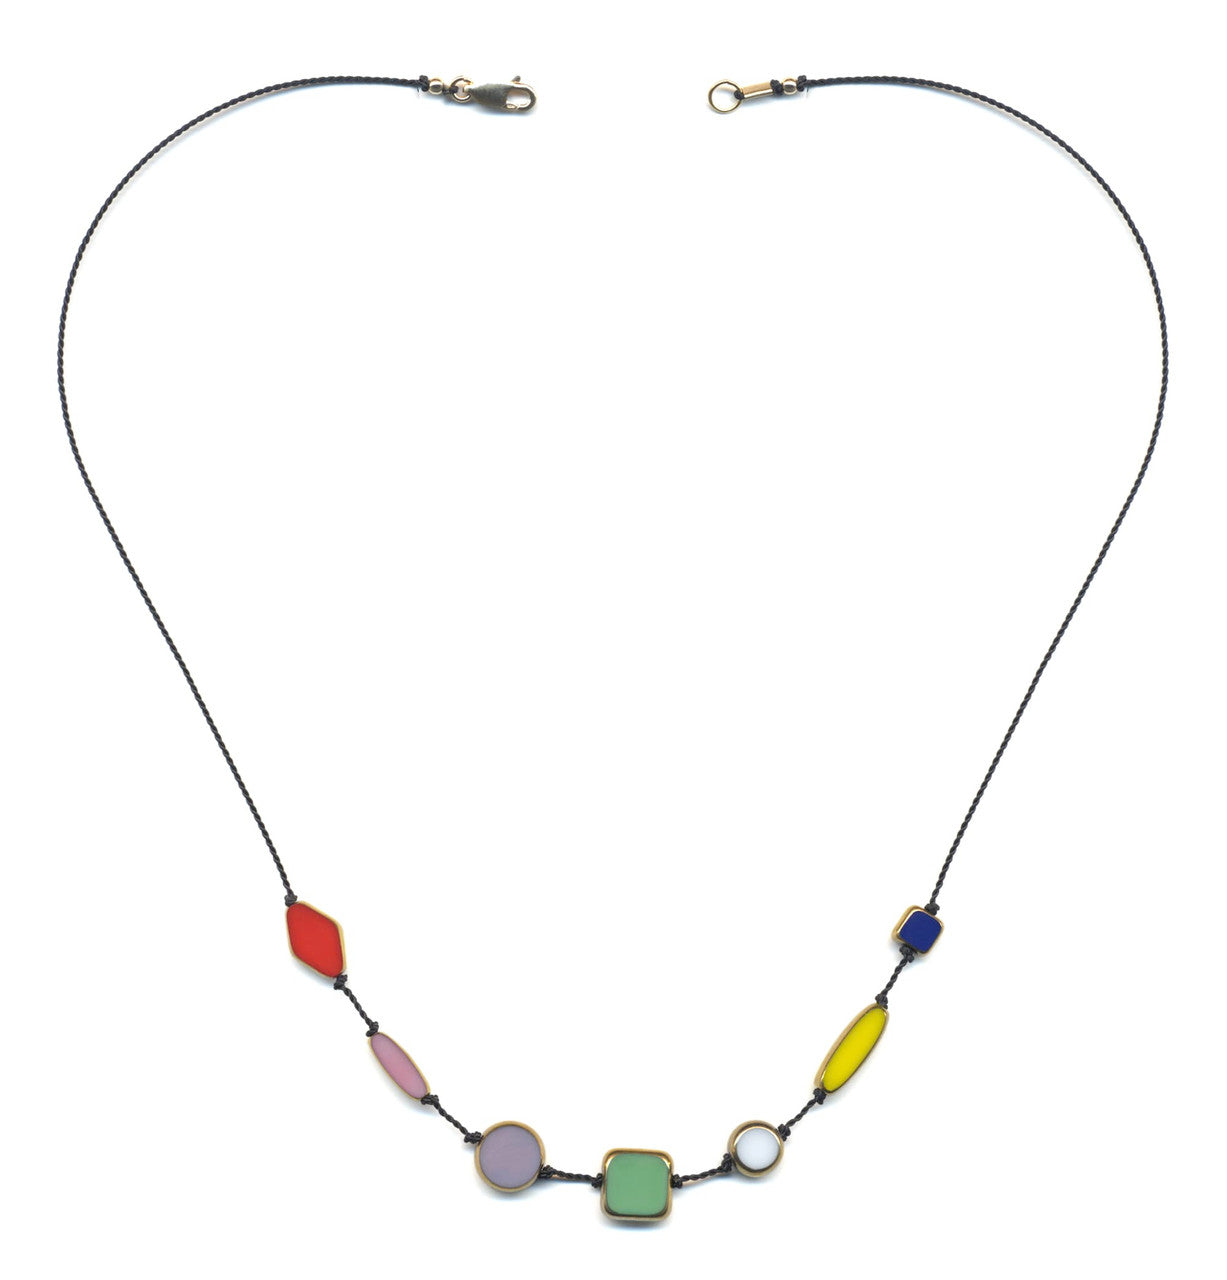 irk-n1858 Necklace by I. Ronni Kappos  (IRK Jewelry)